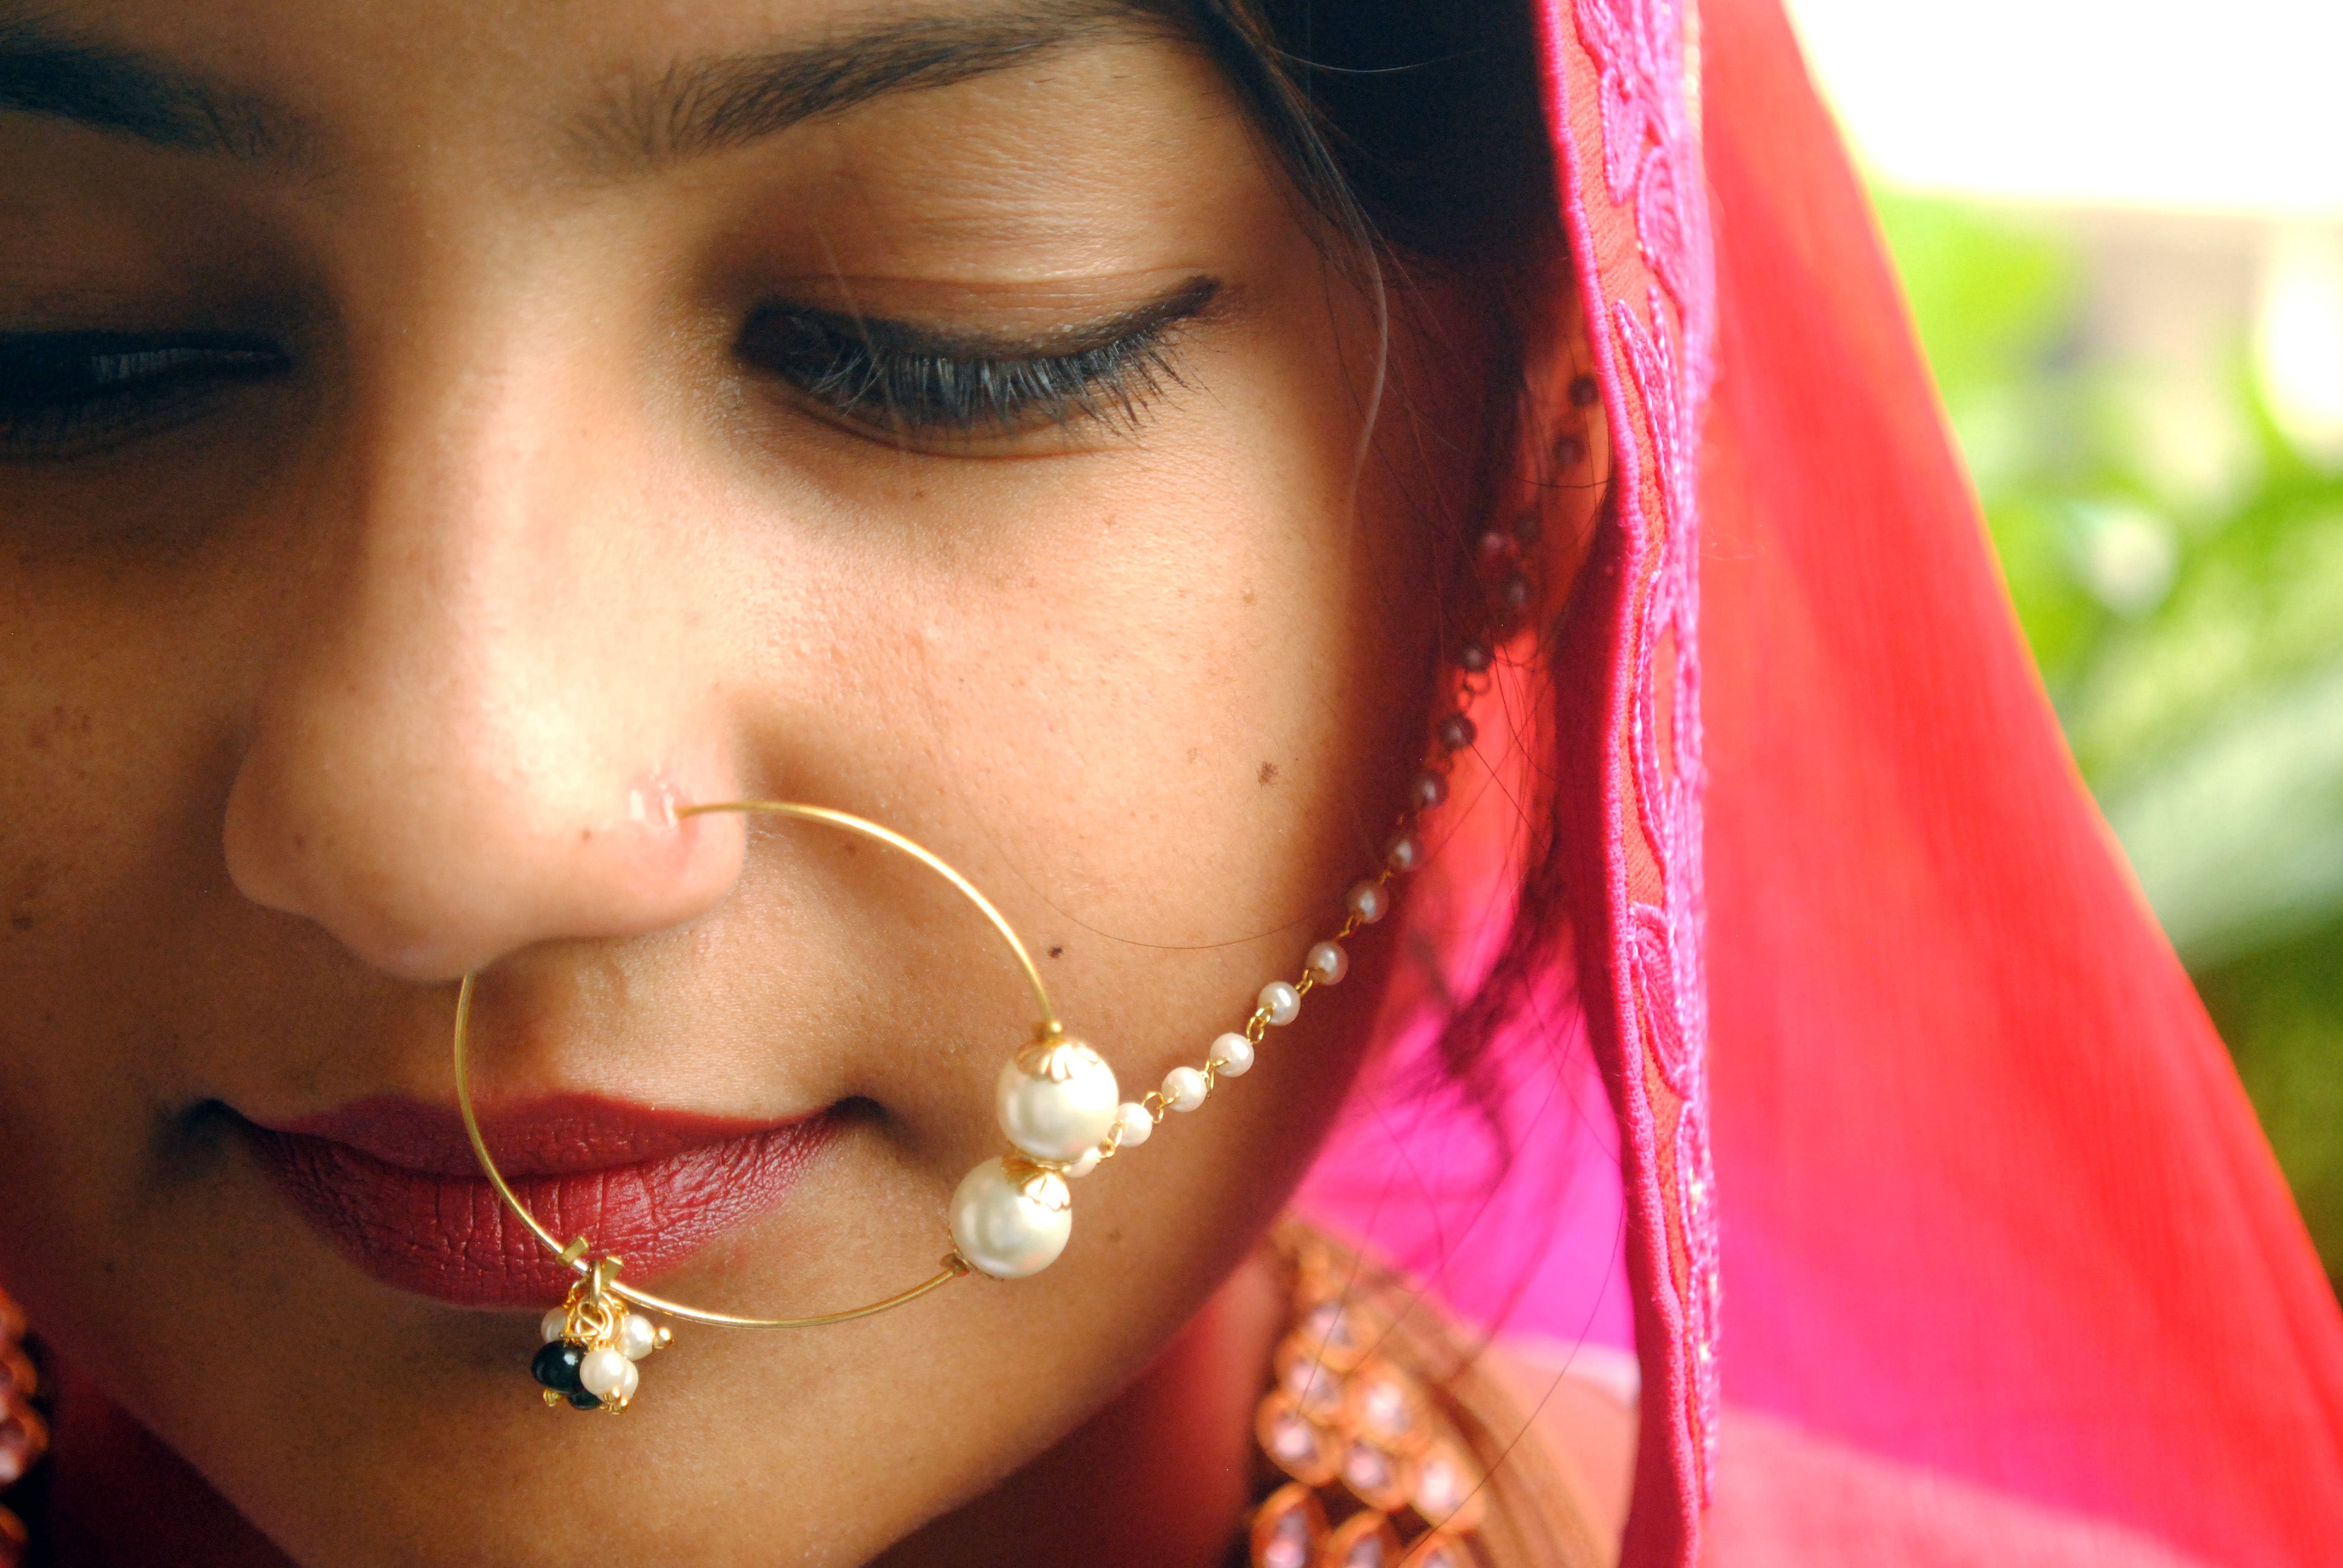 BeAbhika Handmade Artificial Jewelry White Color Pearl Nath For Pierced Nose Body Piercing Jewelry Available On COD In India Heeramandi Style Jewelry Traditional Nose Ring For Women With Hair Chain Gold Tone White Pearl Nose Ring Nathani Bridal Nath